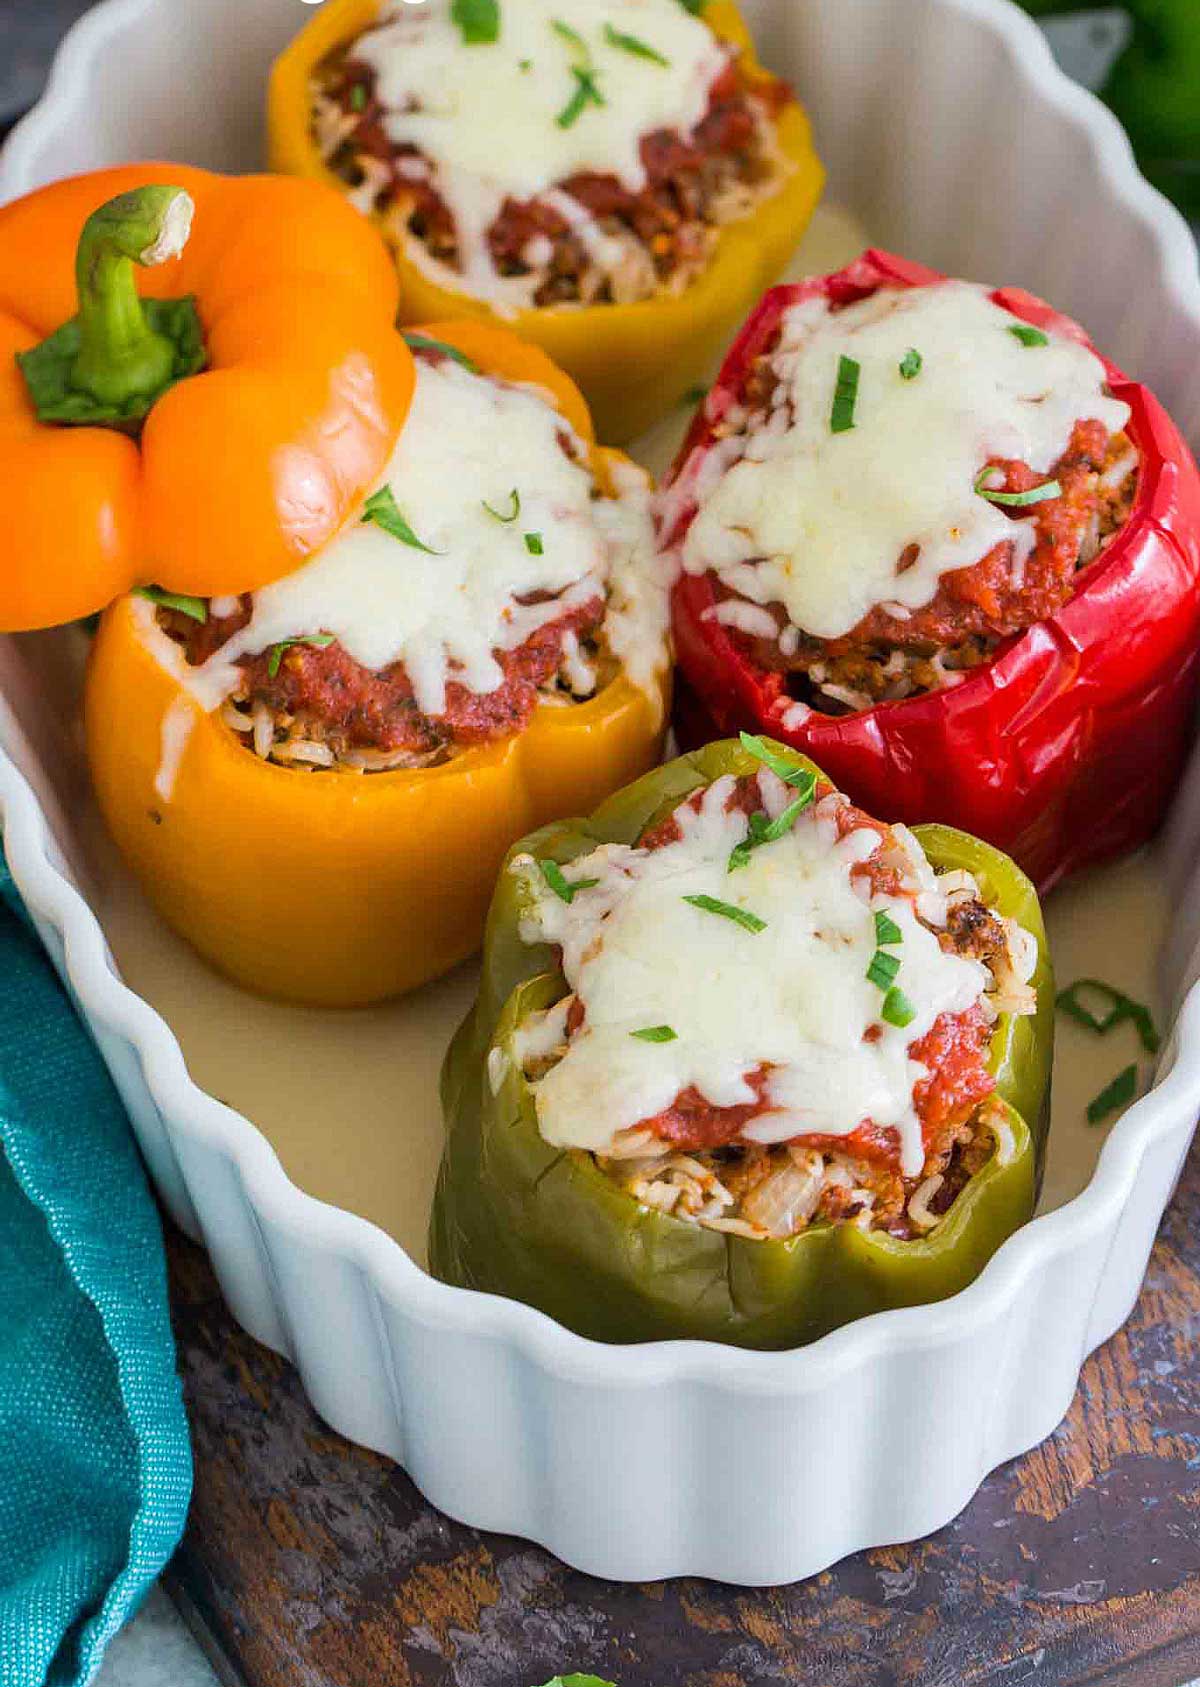 Best Instant Pot Stuffed Peppers Video Sweet And Savory Meals,How Wide Is A Queen Size Bed